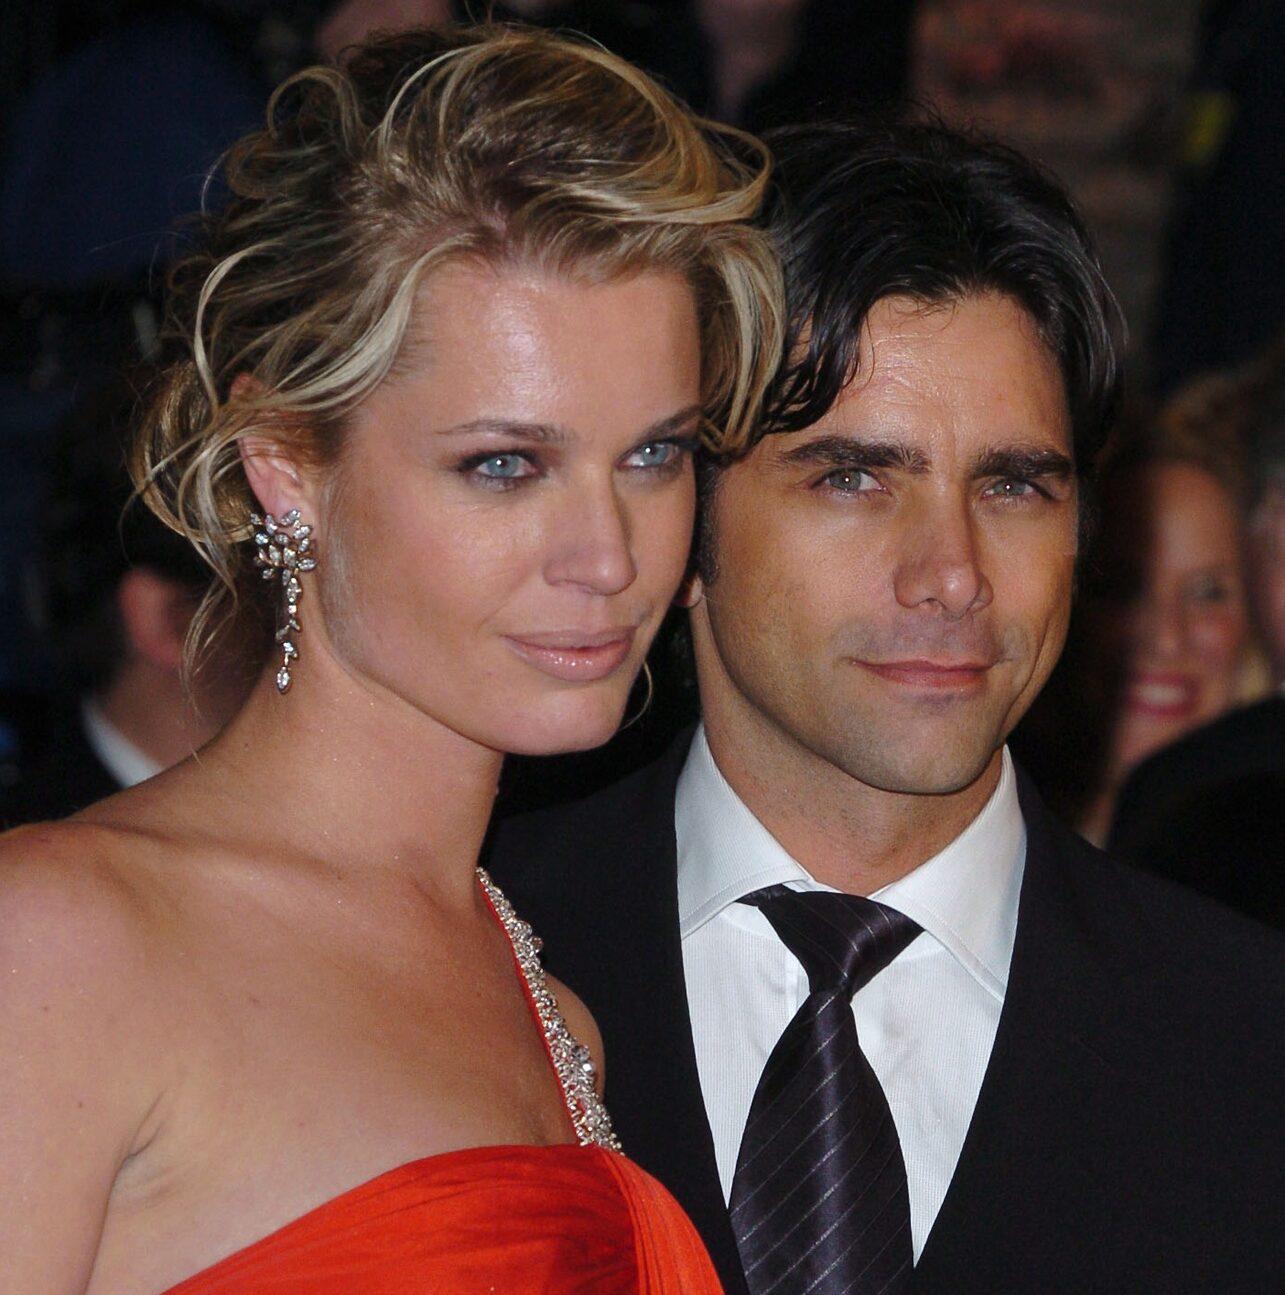 Rebecca Romijn and John Stamos attend Vanity Fair's party after the 76th Academy Awards on Sunday,